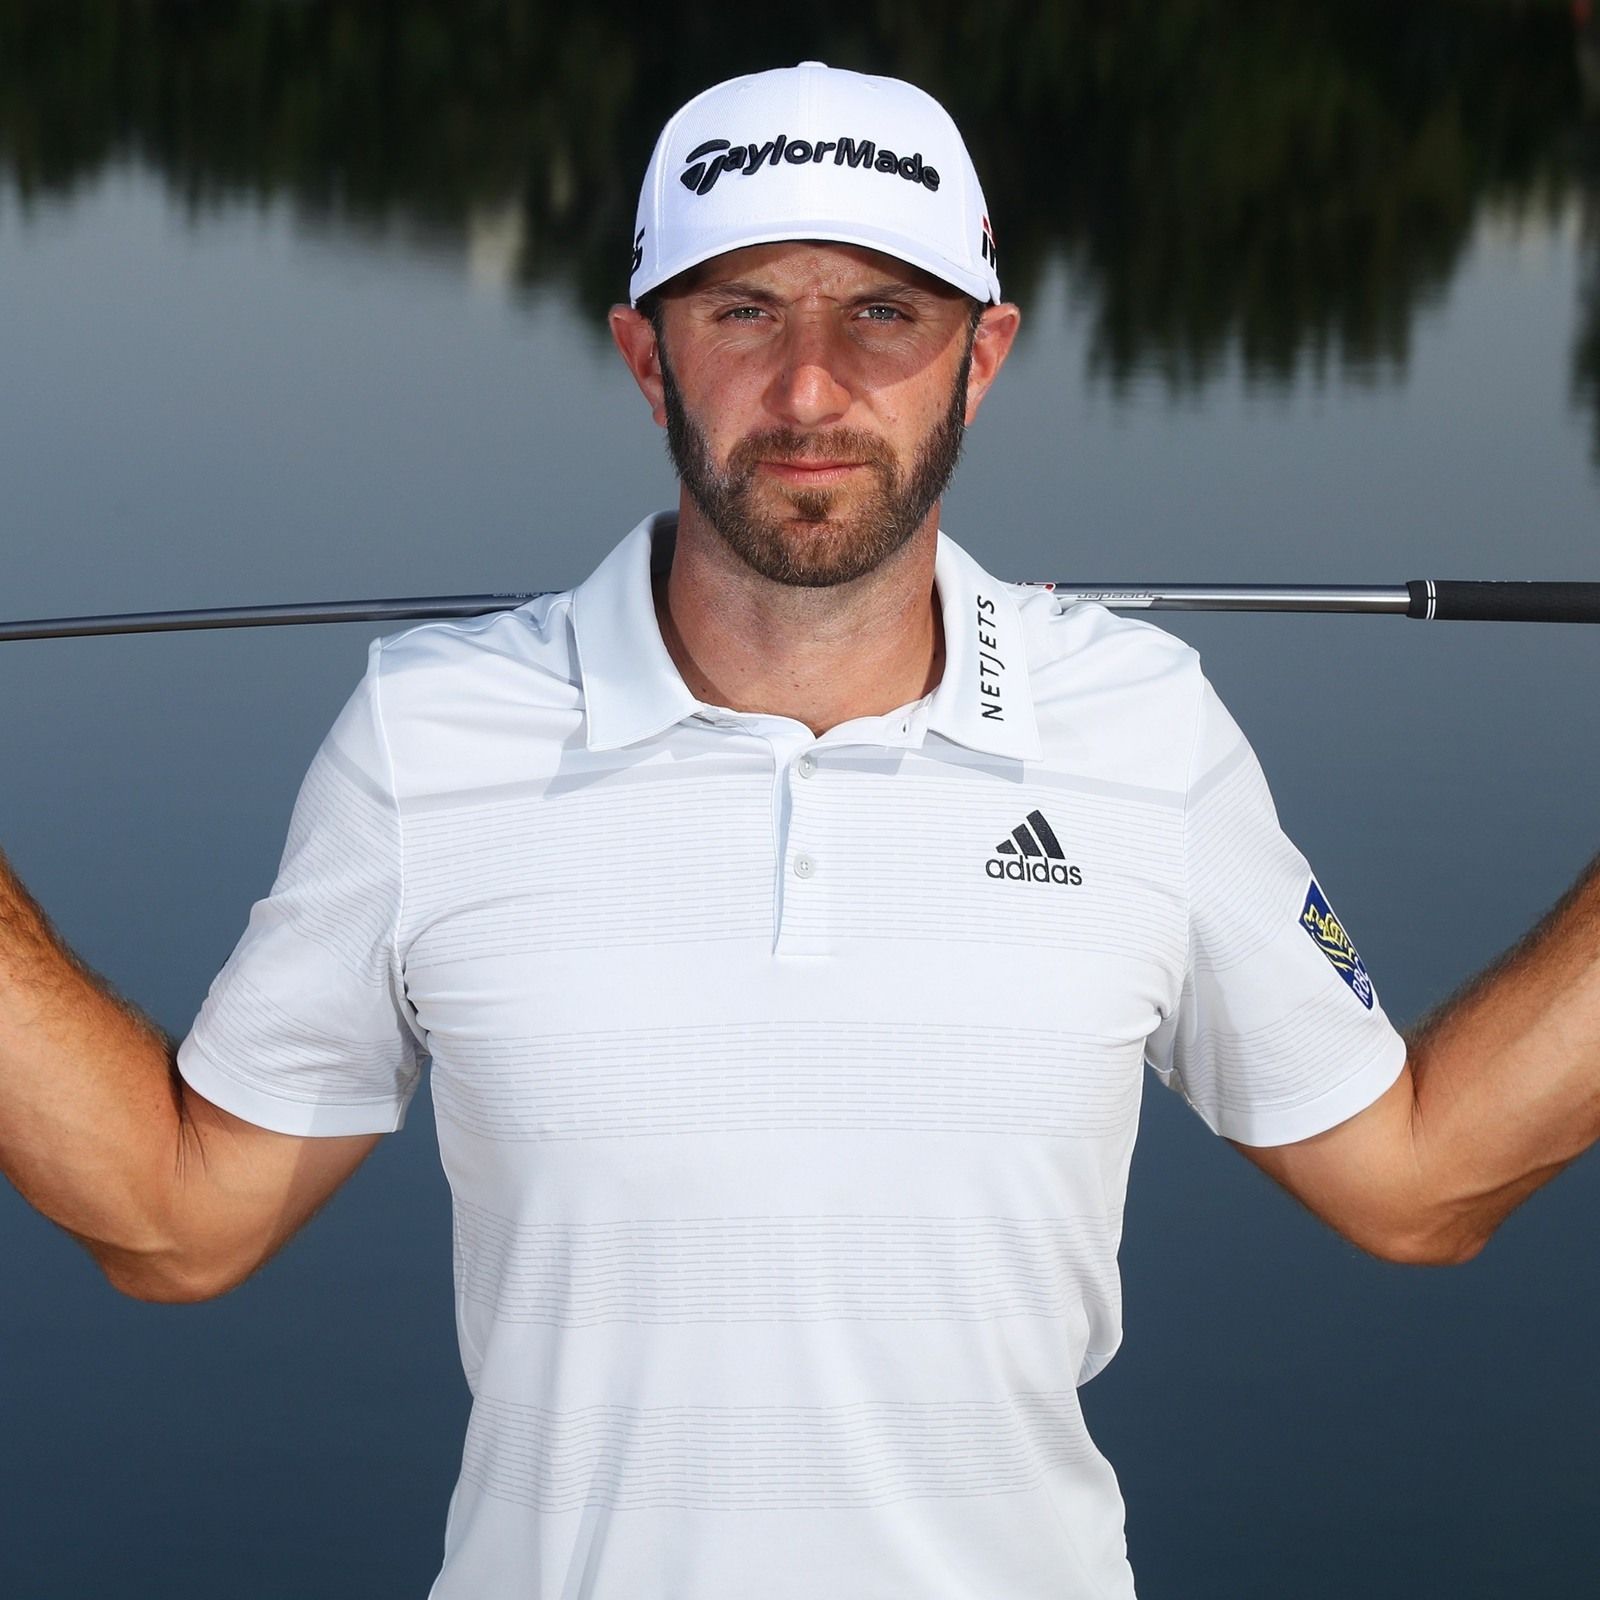 Dustin Johnson Exclusive: ”My career should have been better”